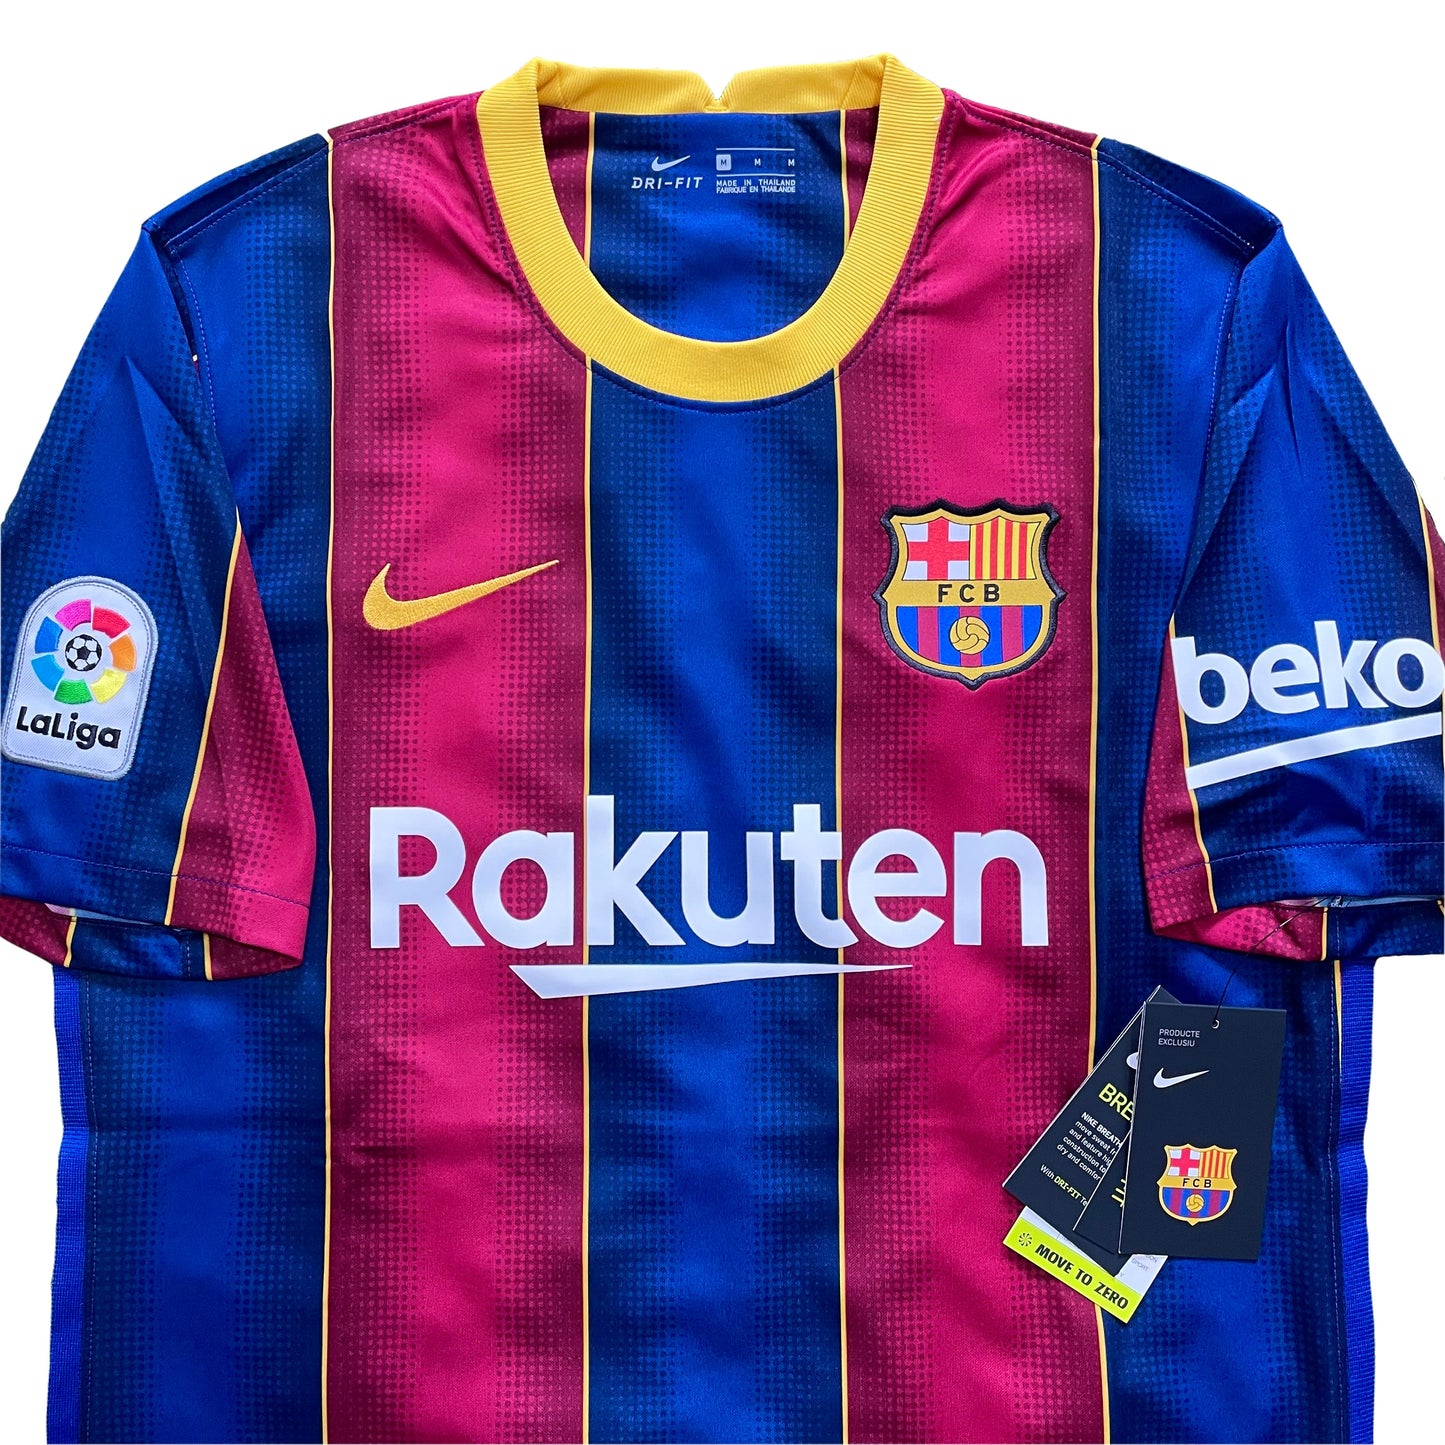 2020-2021 FC Barcelona home shirt #10 Messi (Youth M, Youth L, Youth XL)